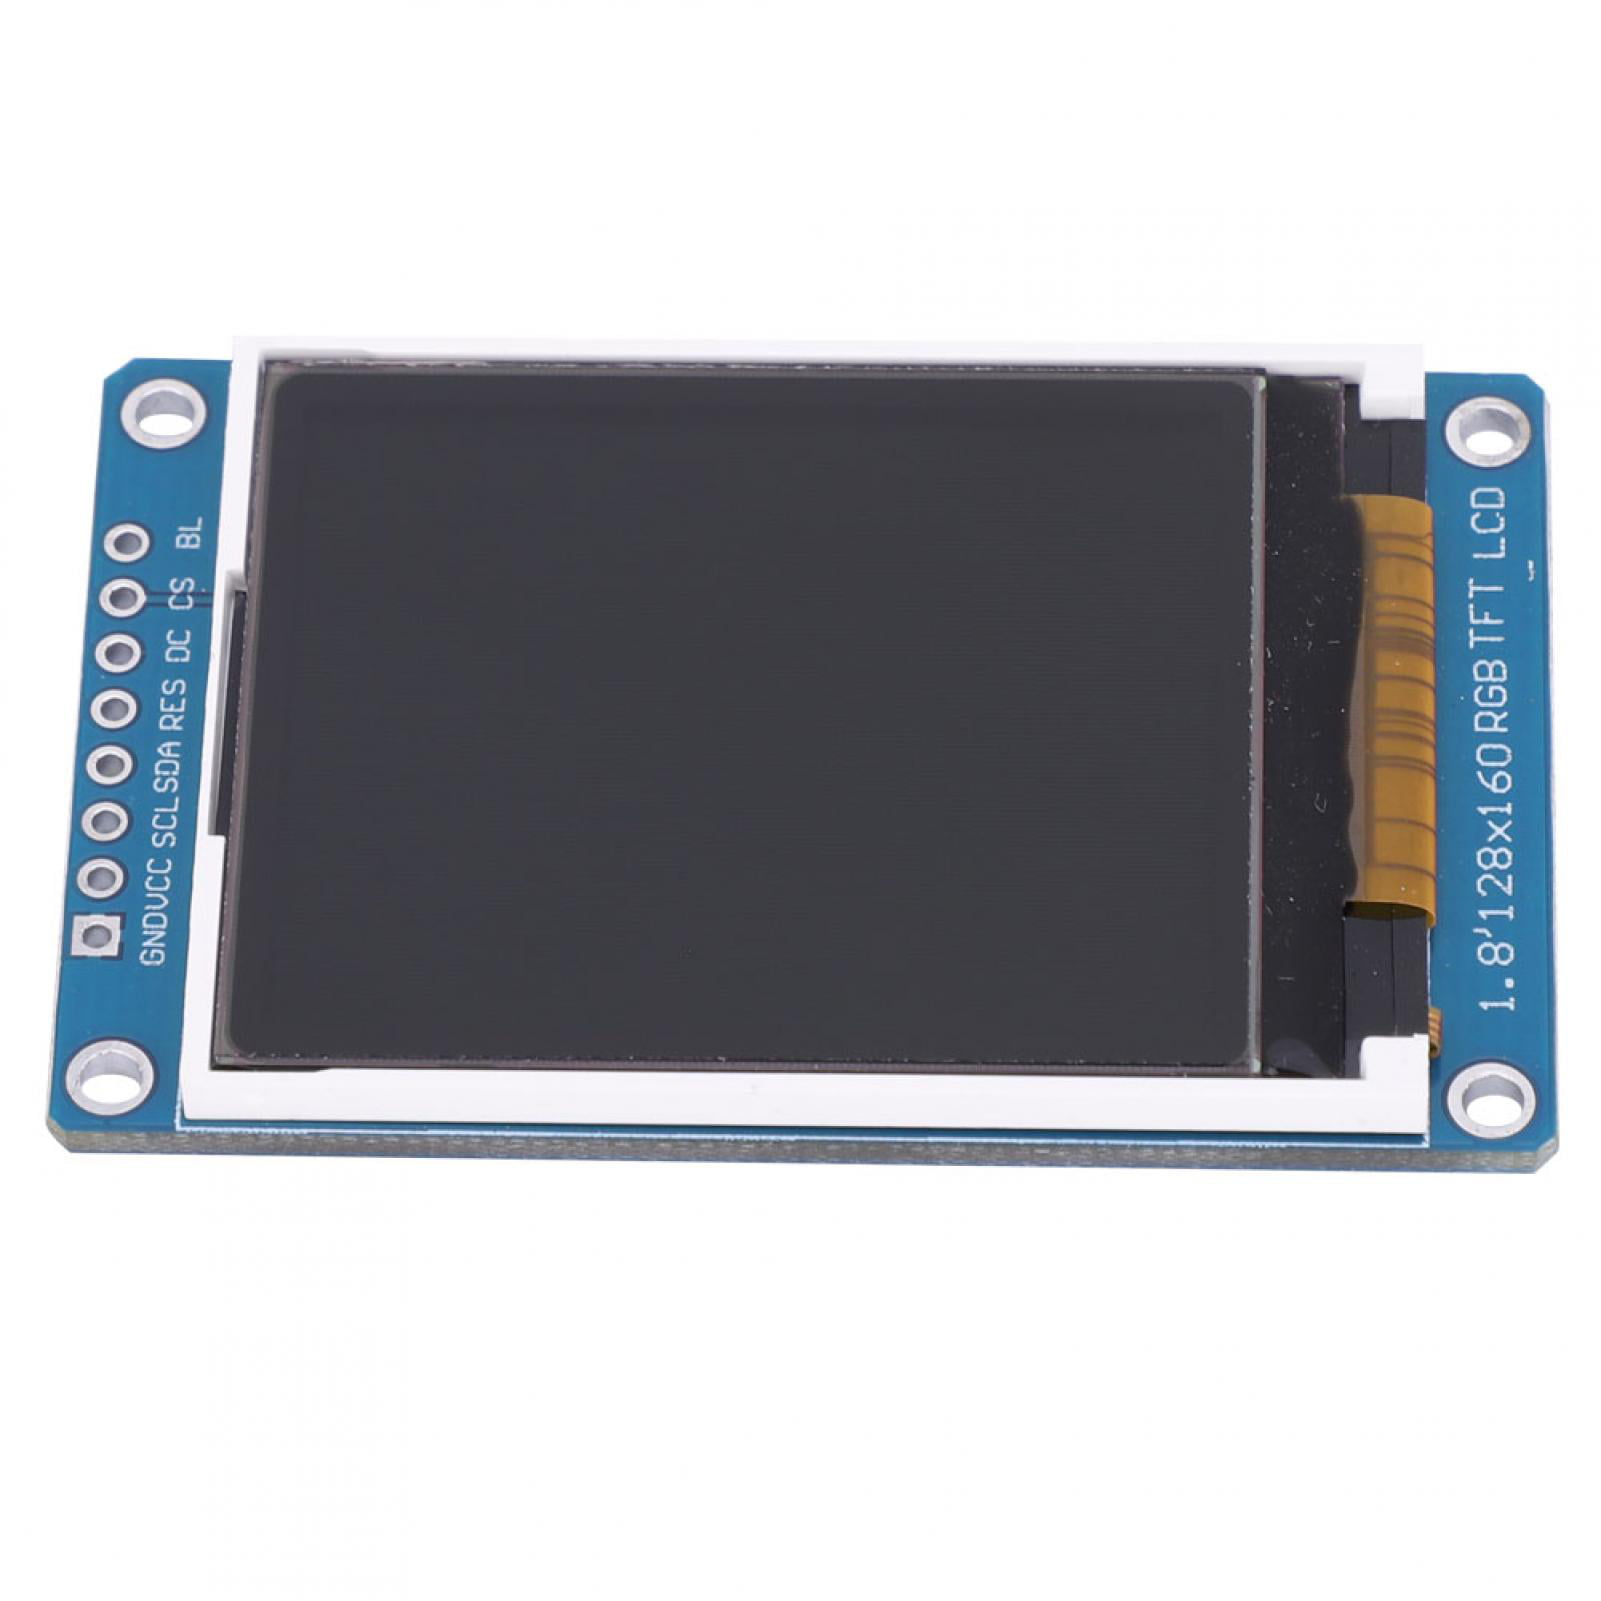 1.8Inch TFT LCD Display Screen 128RGB x 160 Resolution Serial Peripheral Interface for Arduino LCD Display Module